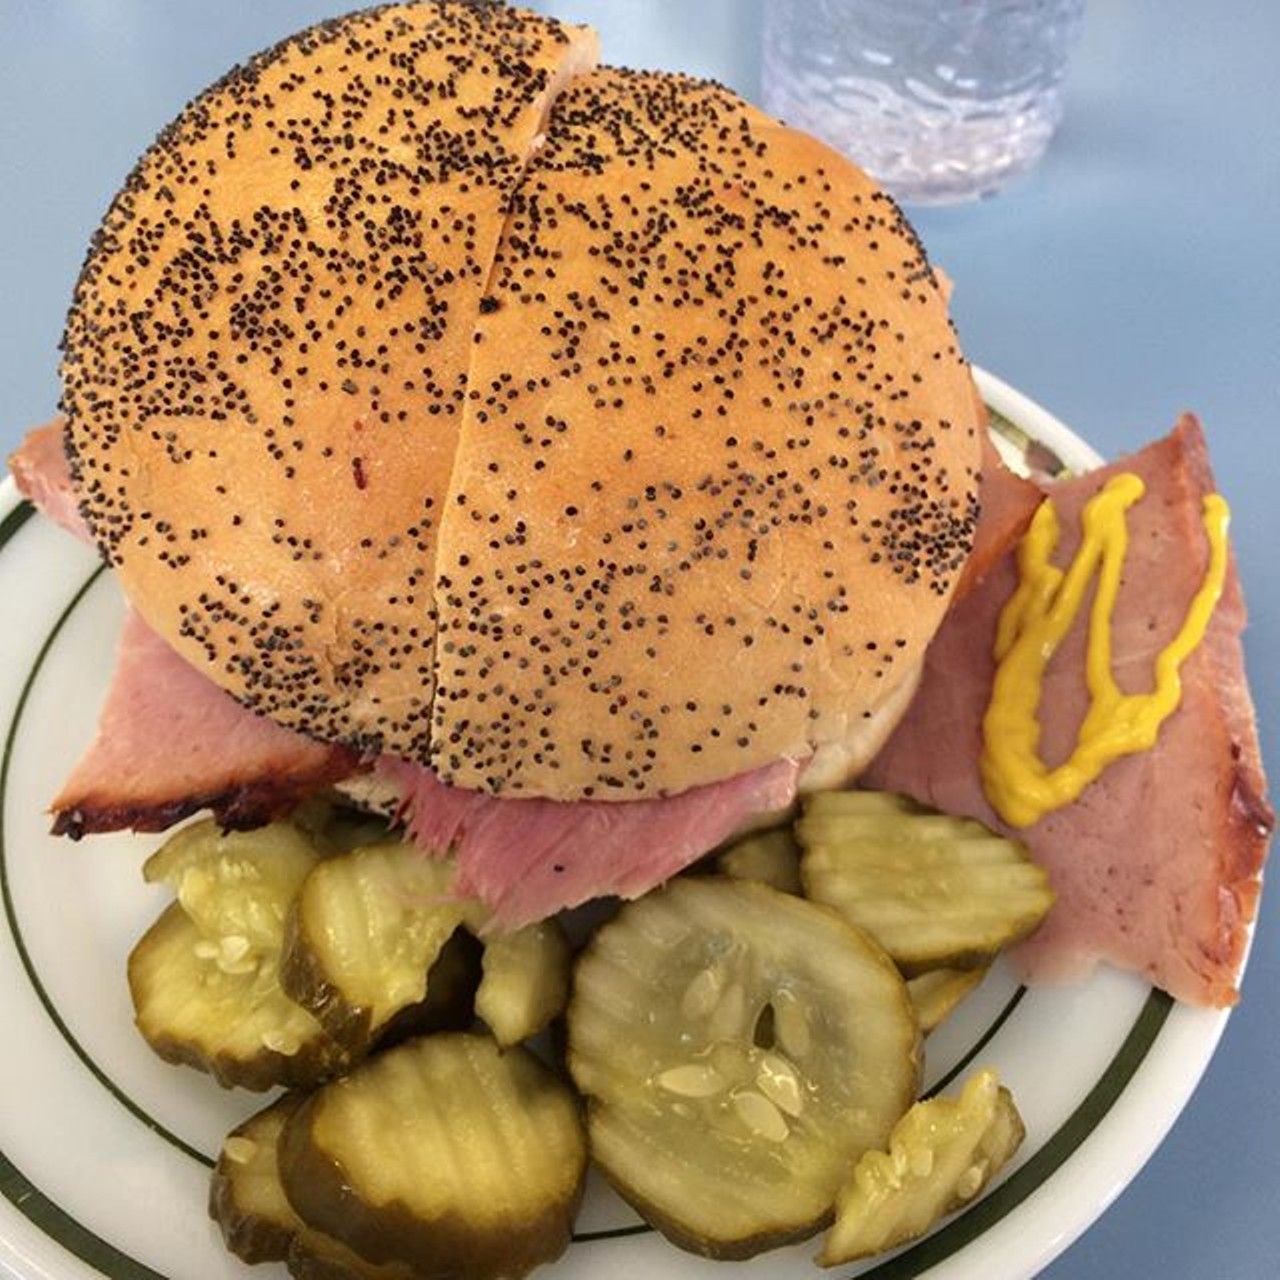 Ham sandwich | Mike&#146;s Ham Place  | $7 
Southwest | 3700 Michigan Ave | 313-894-6922 
Mike&#146;s Famous Ham Place is well known for legendary, melt-in-your-mouth, salt, delicious pork. While the menu has plenty to offer, if you going to go ham might we suggest the good ol&#146;e standby of the Ham sandwich? Packed with enough meat to satisfy two, or one if loving. 
(Photo: tandembicycle, via Instagram)